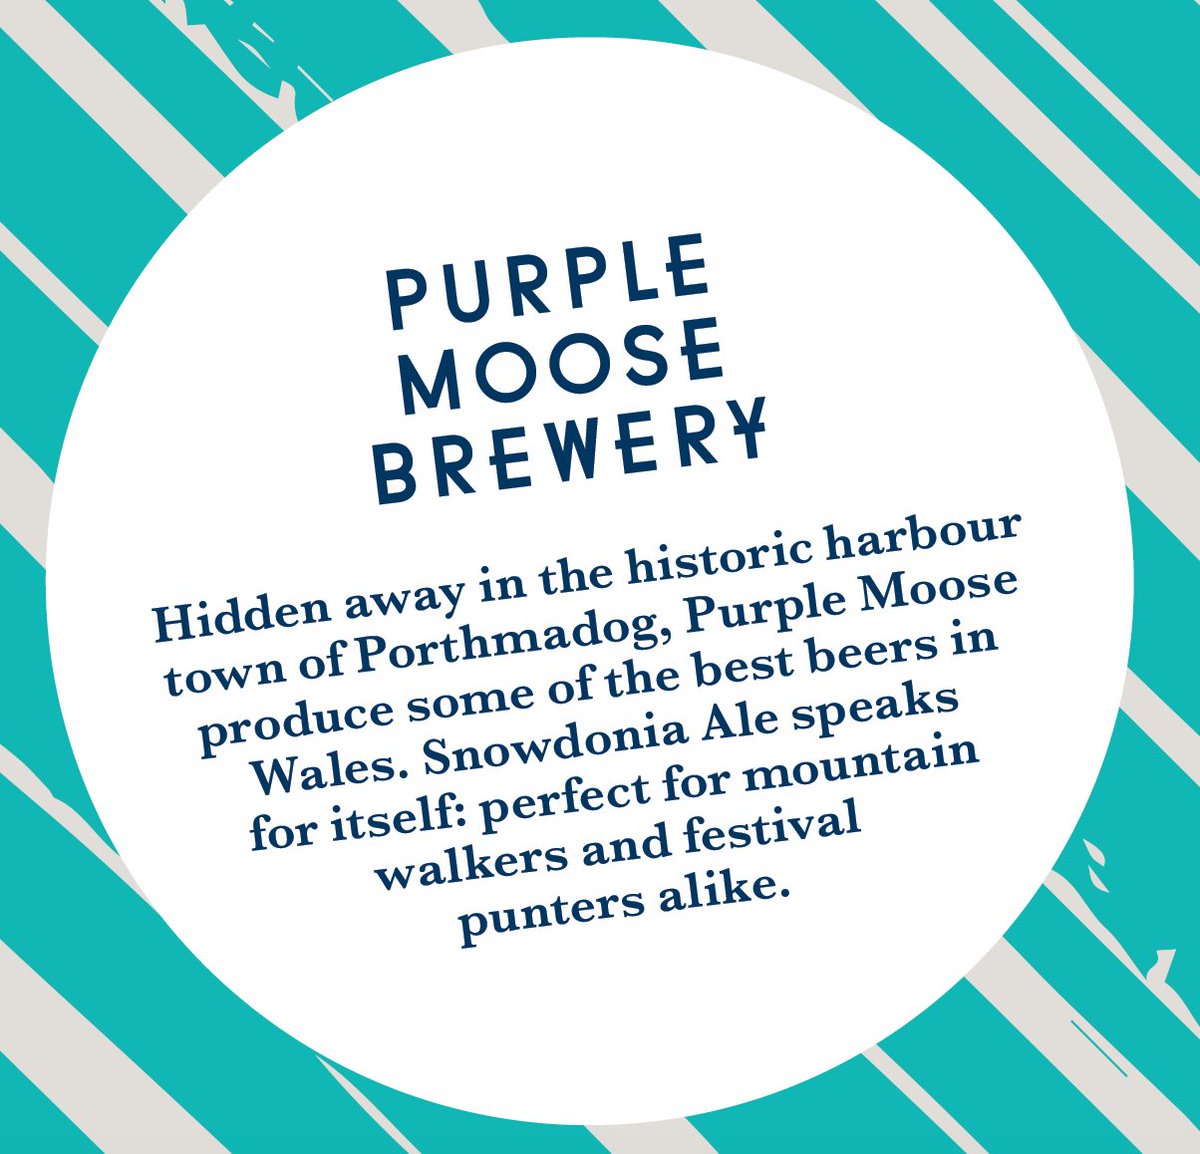 RT @GreenManFest: BREWERY PROFILE: Porthmadog you say? Can only be the inimitable @purplemoosebrew.... https://t.co/Oe1PWCC0r5